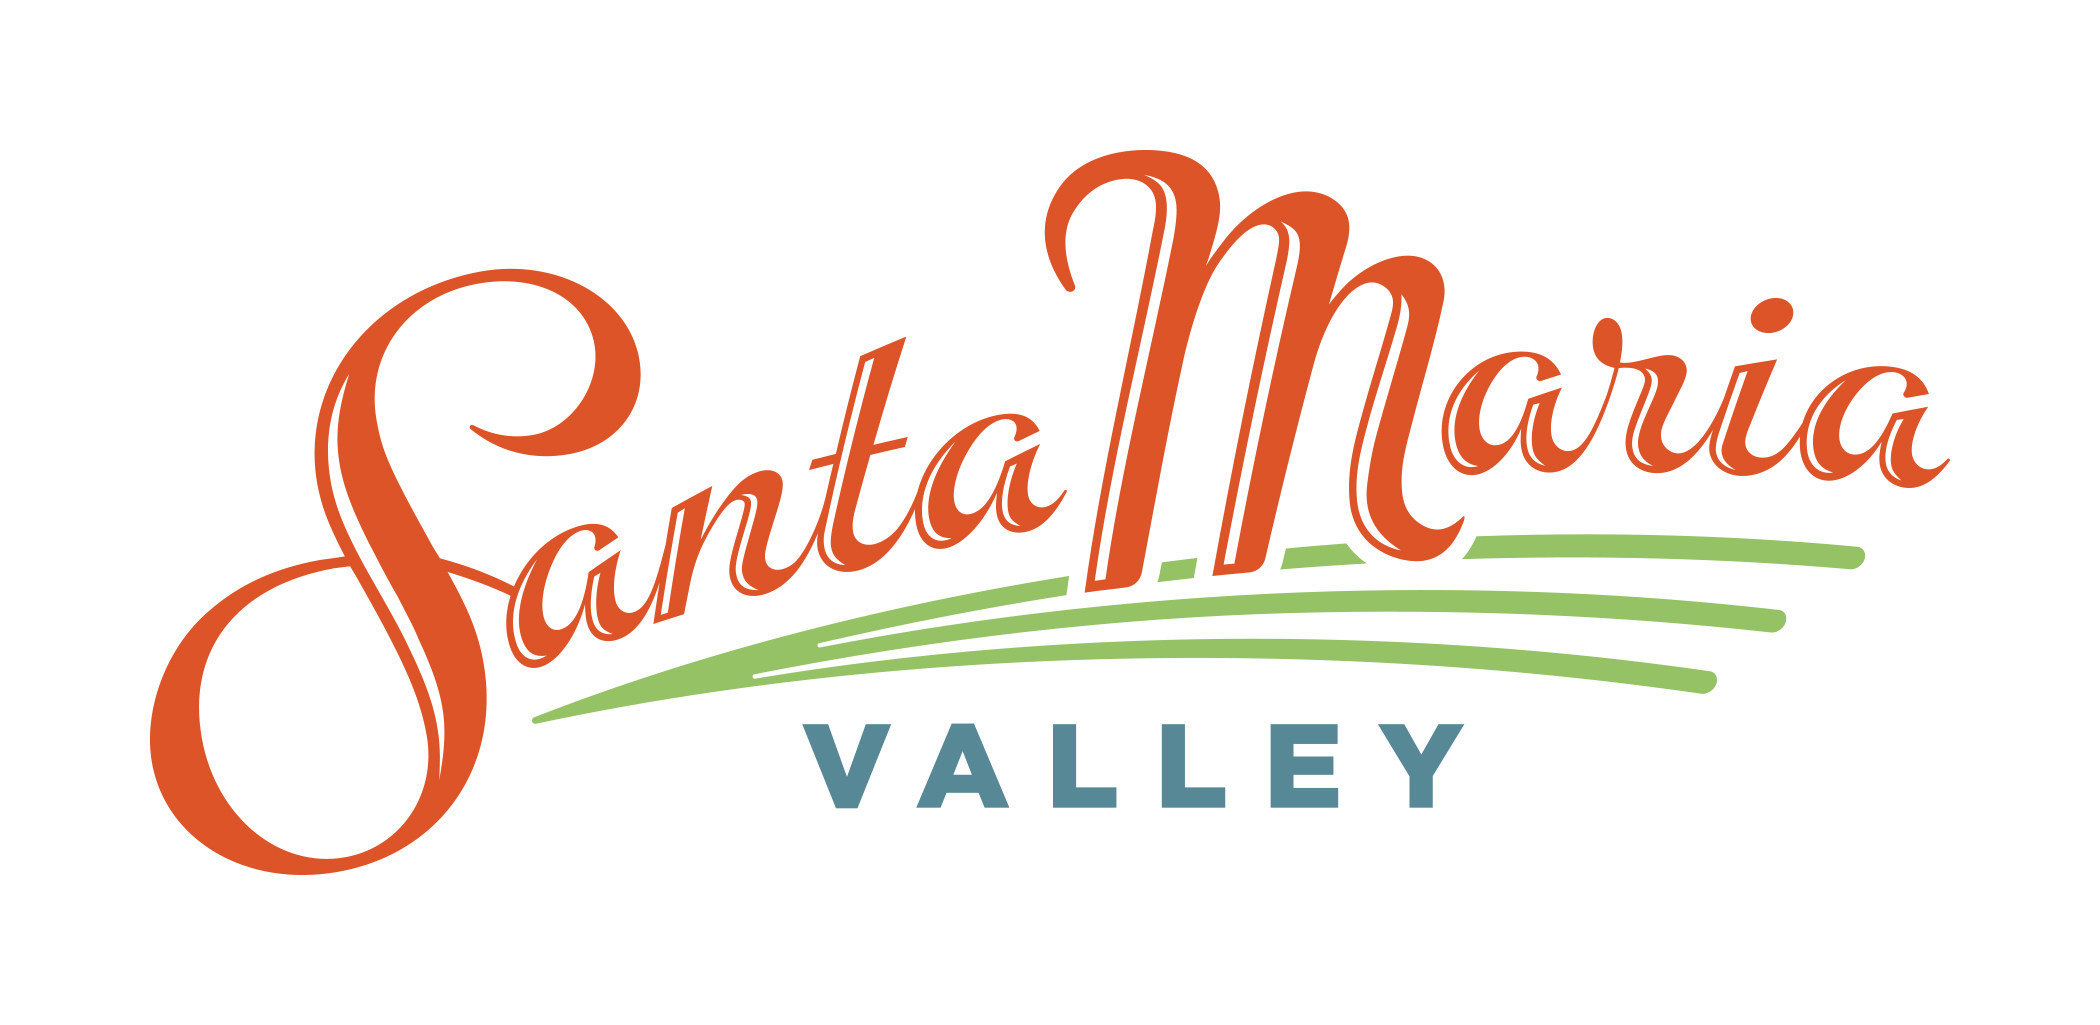 Serving the greater Santa Maria Valley in the heart of California’s Central Coast, the Santa Maria Valley Chamber of Commerce and Visitors Bureau is a nonprofit association that facilitates local tourism and provides information on the region’s many attractions and visitor services. Famed for its fine wines, natural wonders, agricultural heritage and flavorful barbecue, the Santa Maria Valley offers a broad range of cultural, sporting and historical experiences. (PRNewsfoto/Santa Maria Valley)